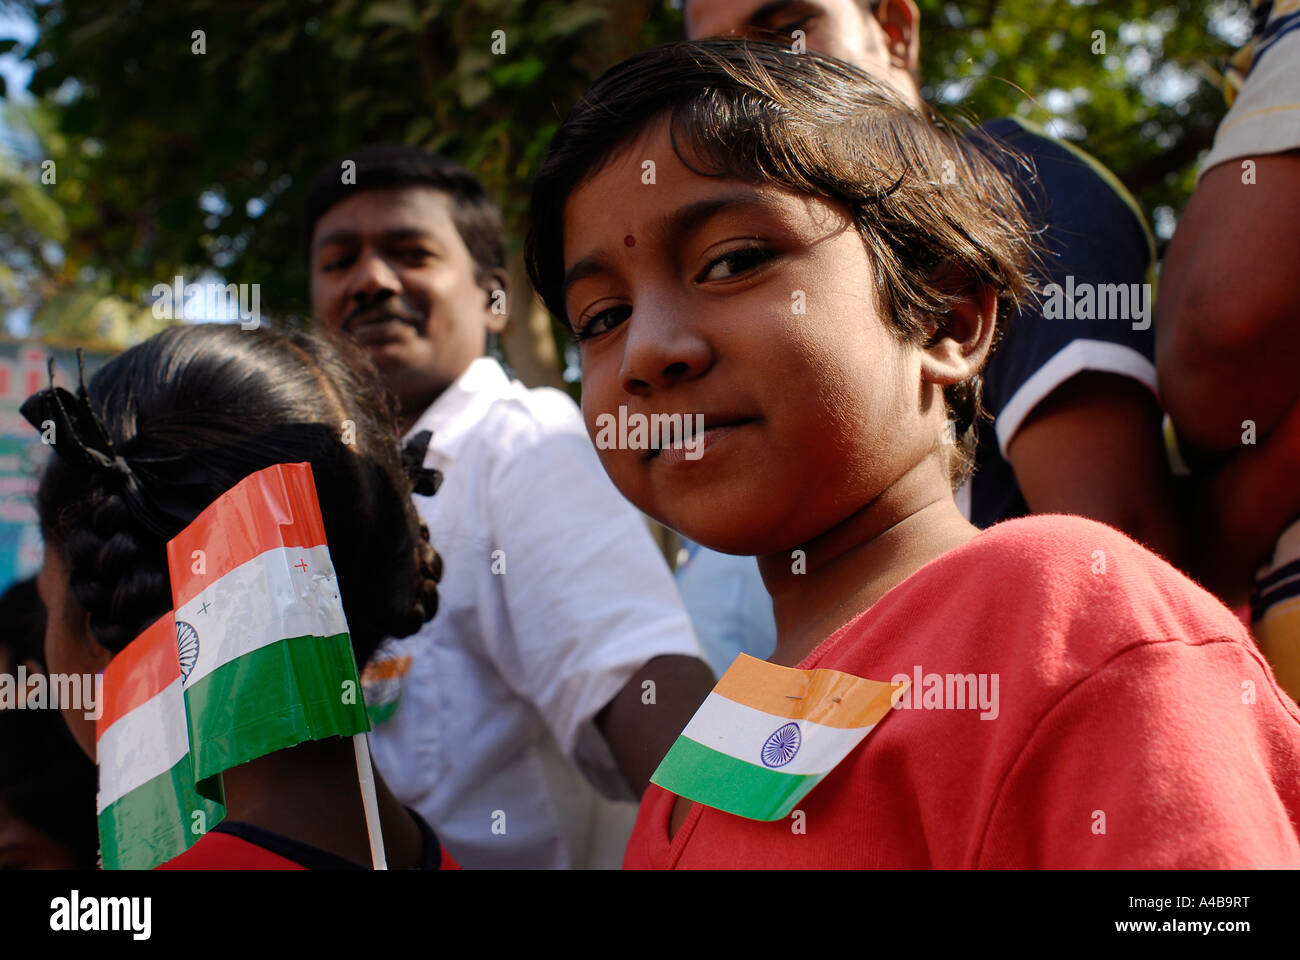 Stock Image of young dalit girl with Indian flag at Republic Day ...